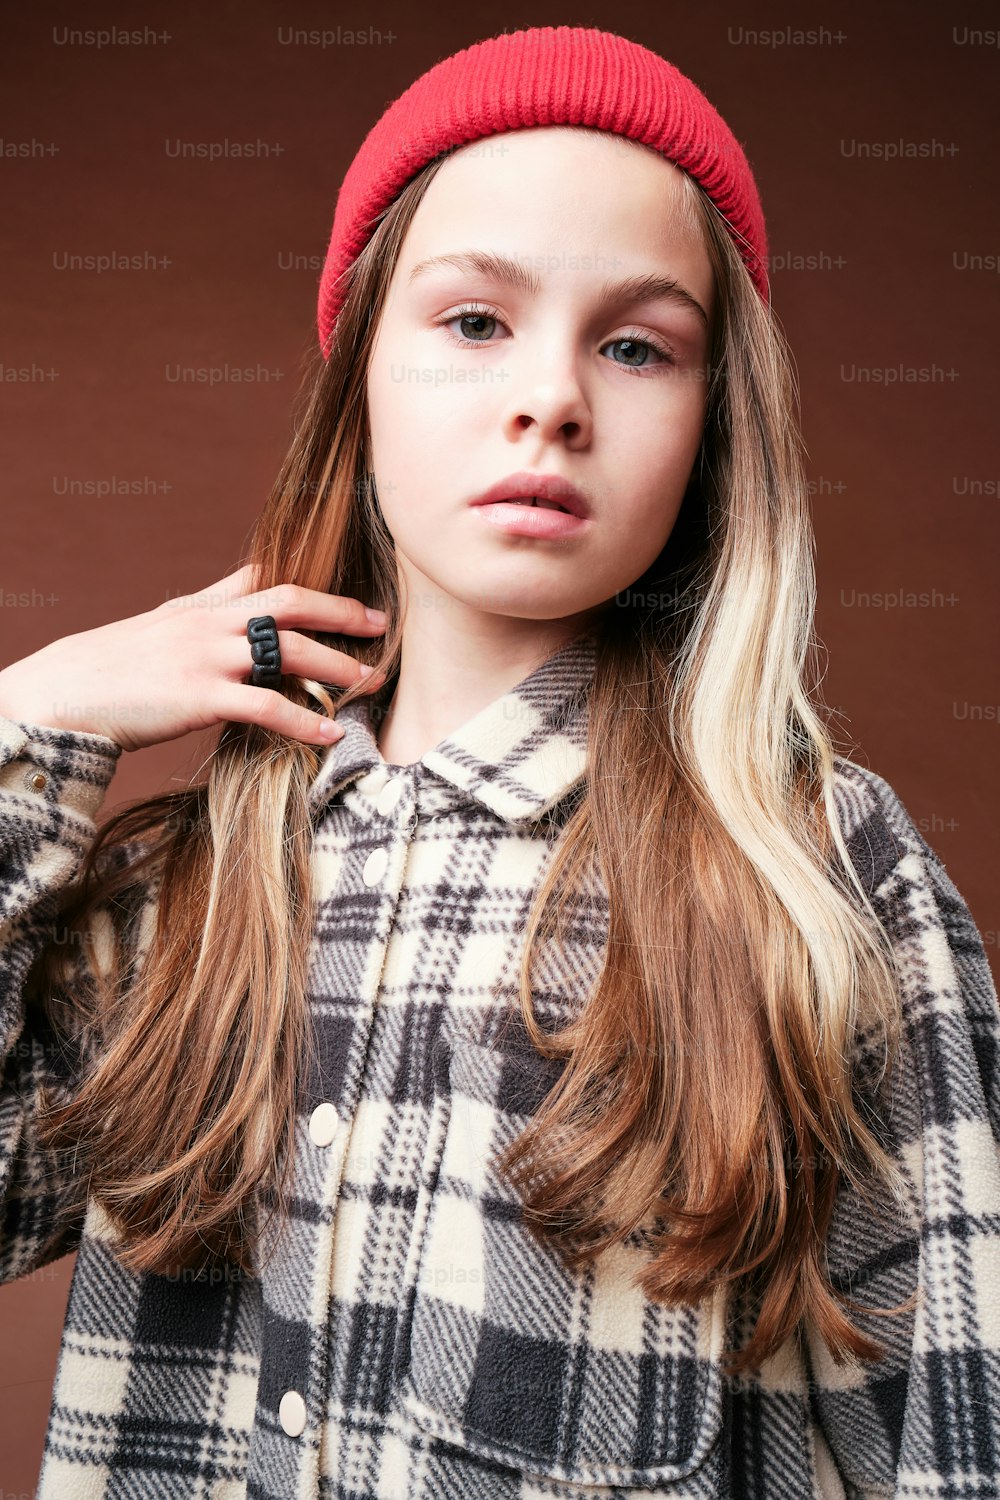 a girl with long hair wearing a red hat